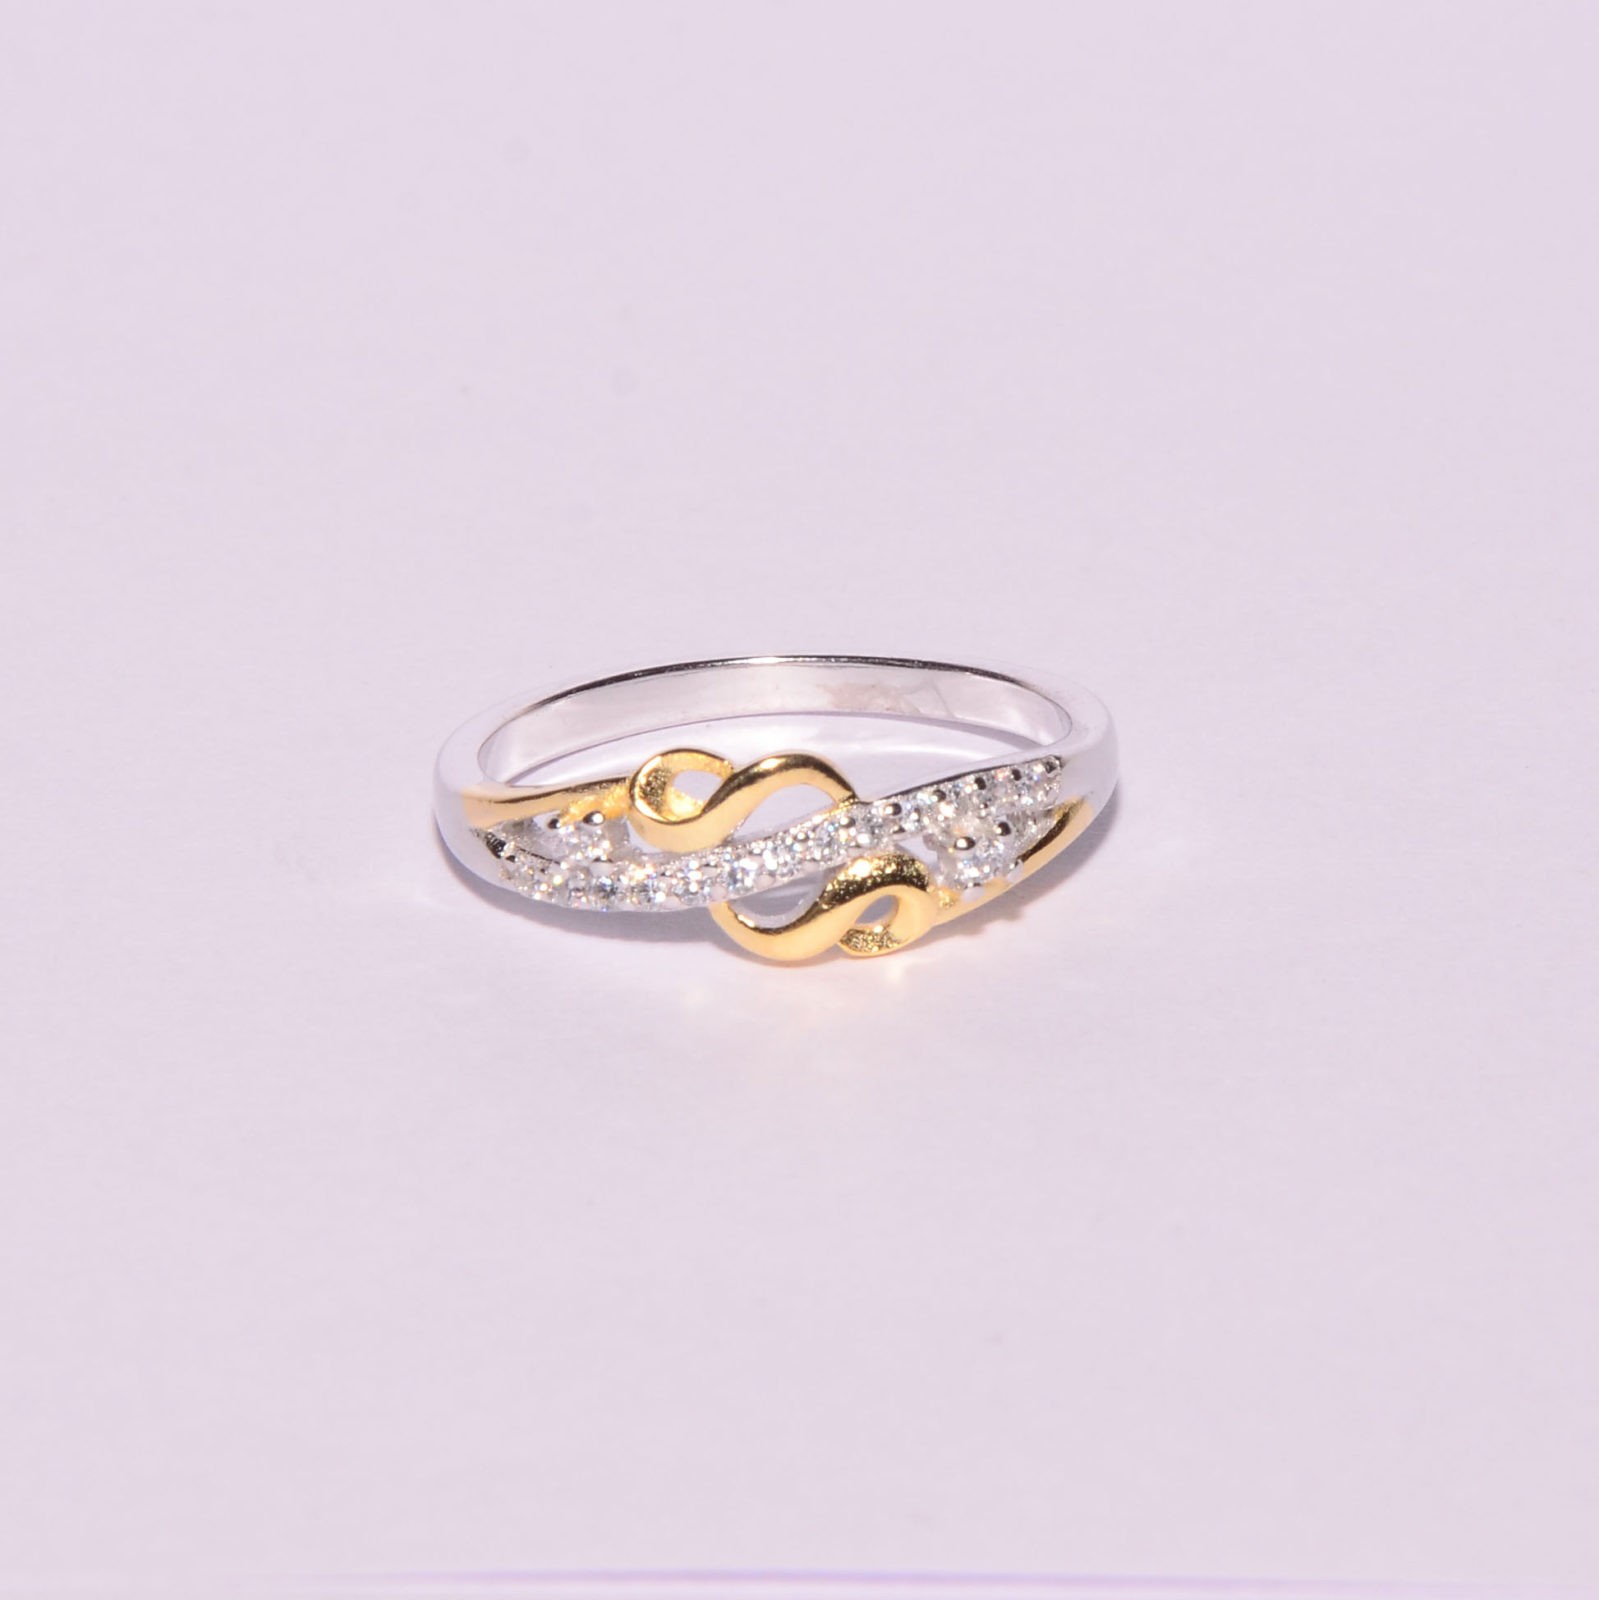 Stylish Rings for Girls at Affordable Prices at Dishis Jewels